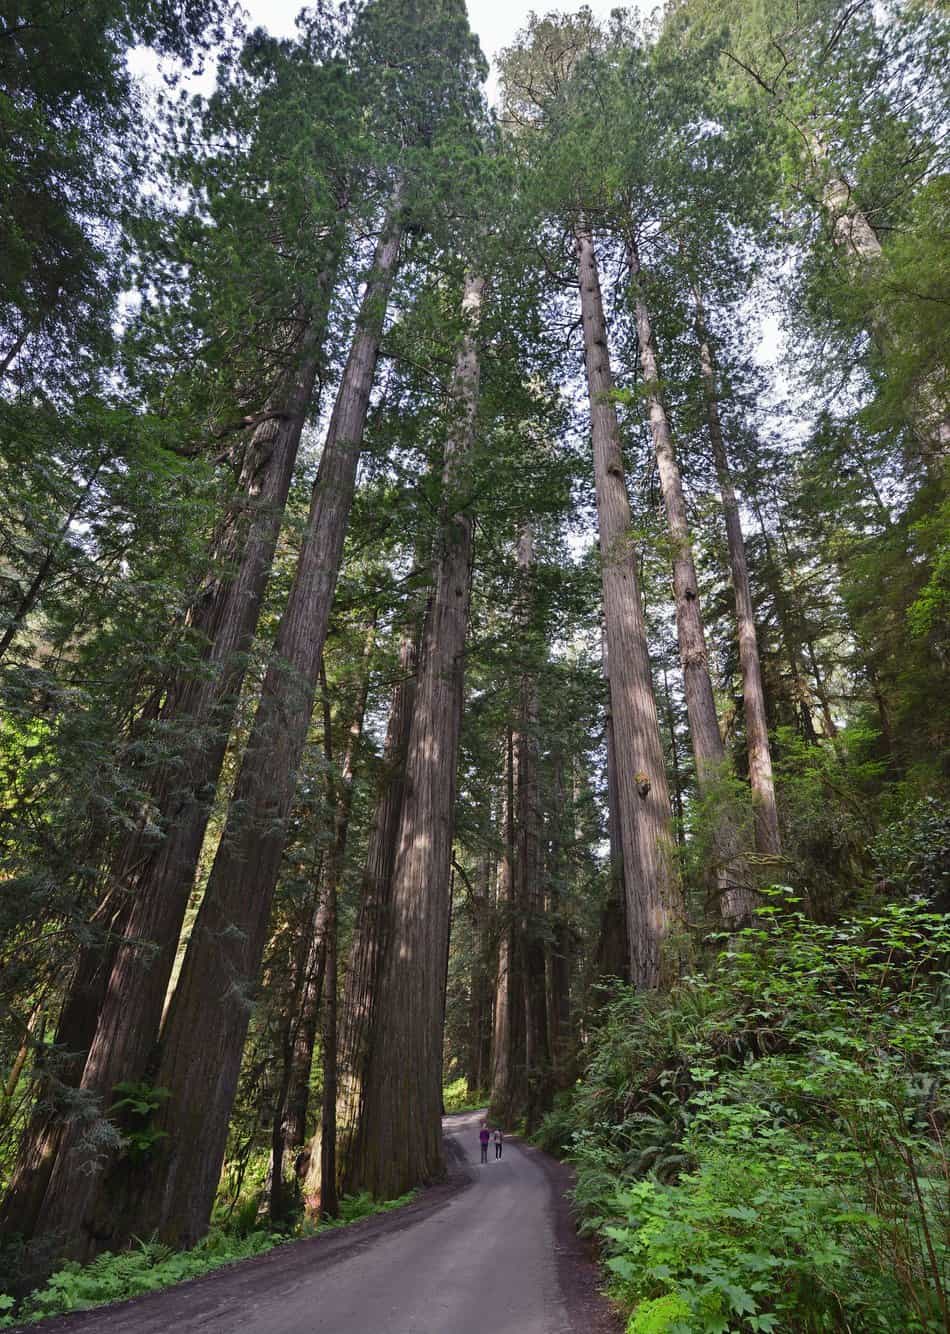 Visitors walking down Howland Hill Rd in Redwood National Park with towering redwoods on either side.